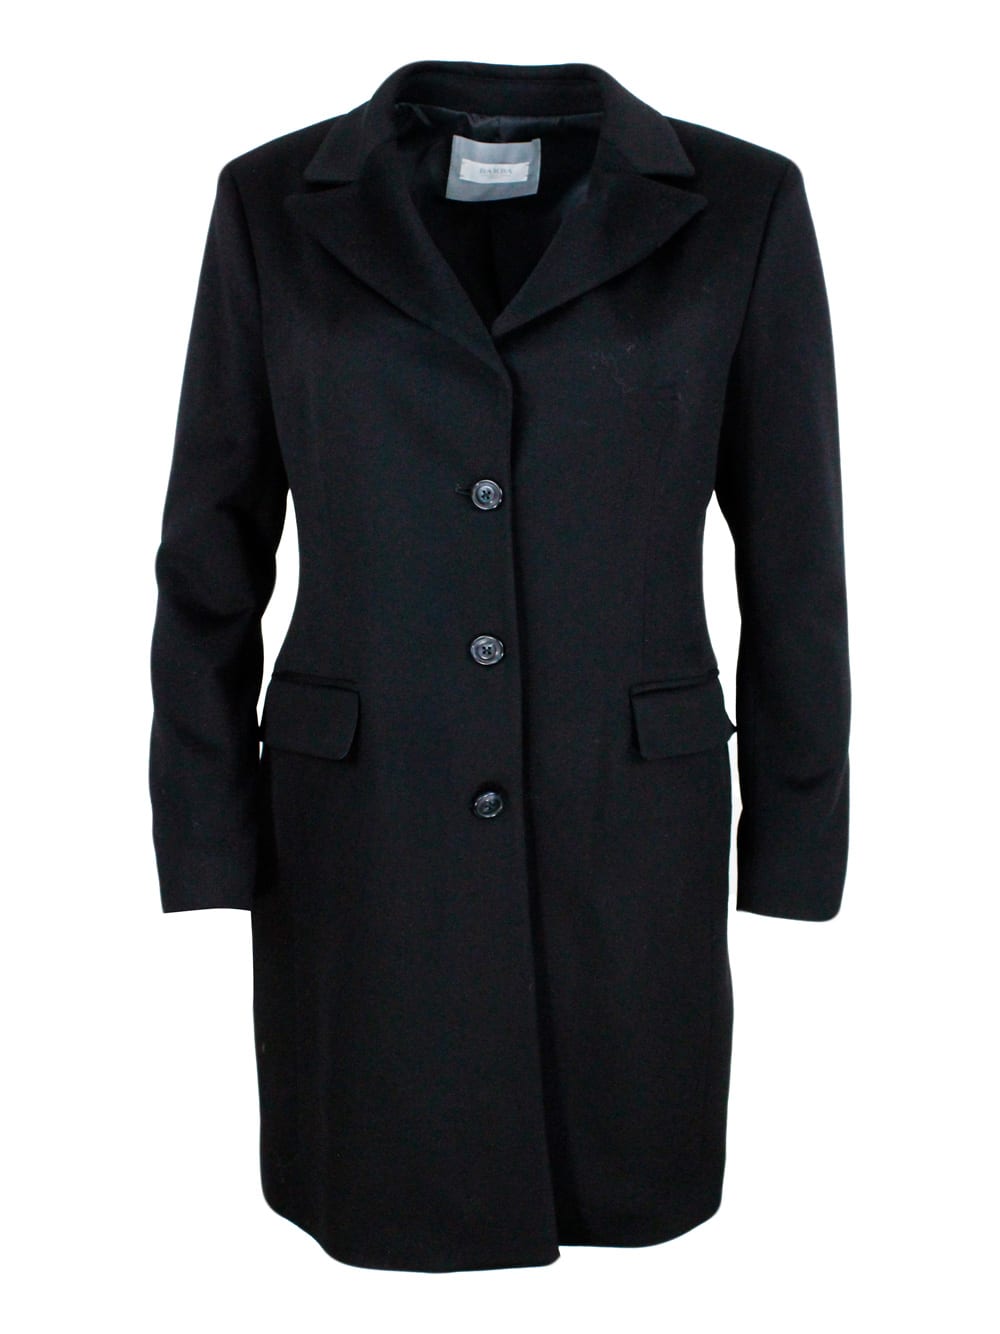 Barba Napoli Single-breasted Coat Made Of Soft And Precious Cashmere With Flap Pockets And Button Closure. Matchi In Black